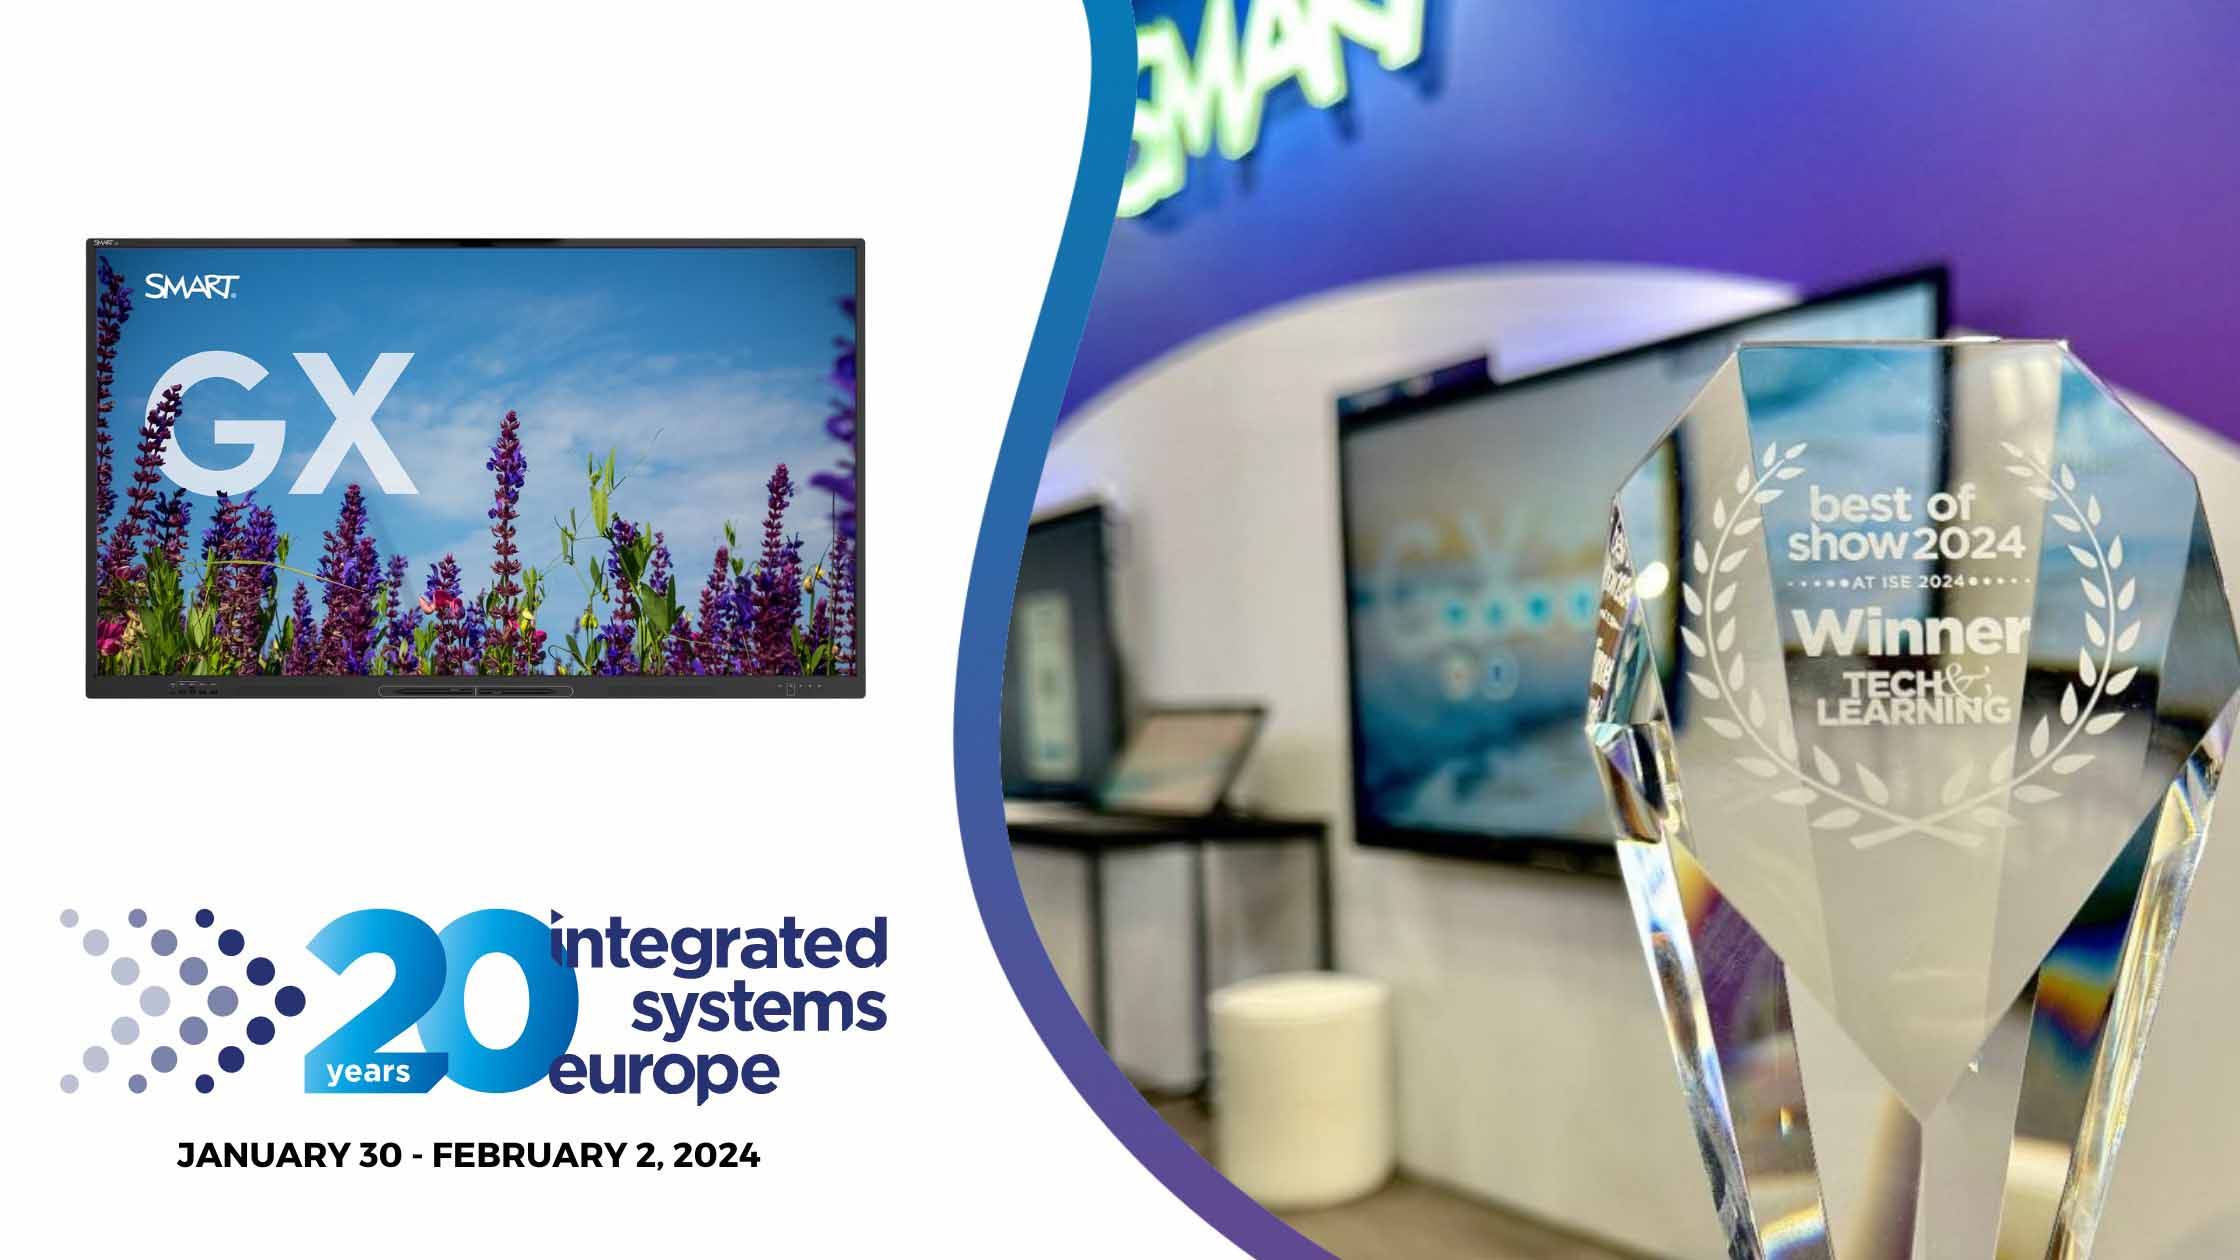 Award-winning SMART GX interactive display showcased at ISE 2024, with the Tech & Learning Best of Show trophy prominently displayed.